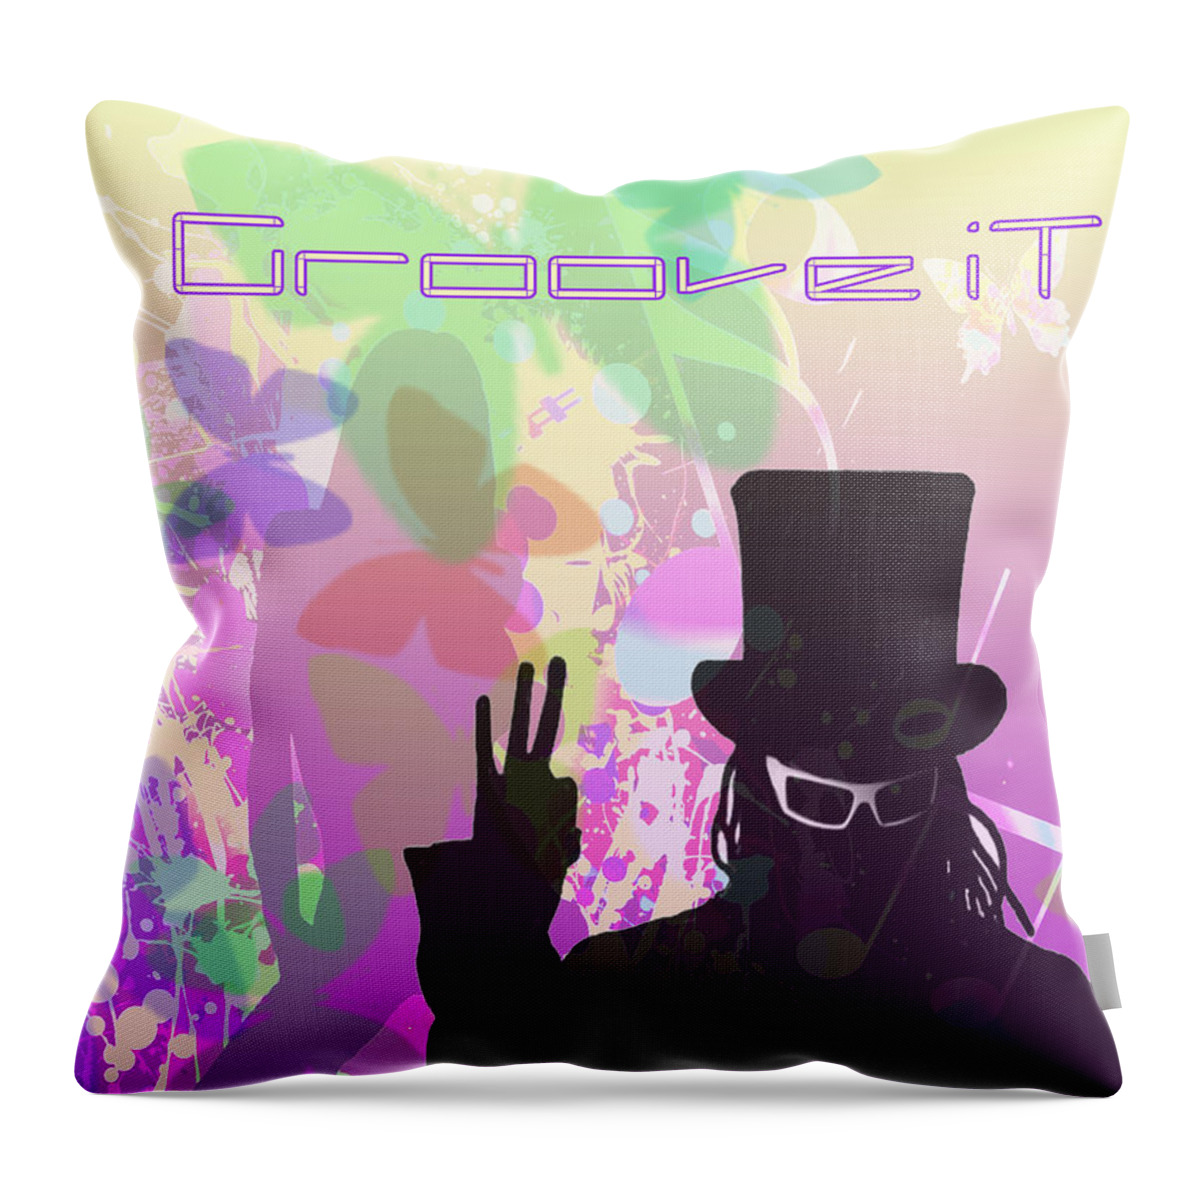 Dance Throw Pillow featuring the photograph Groove It by Greg Sharpe